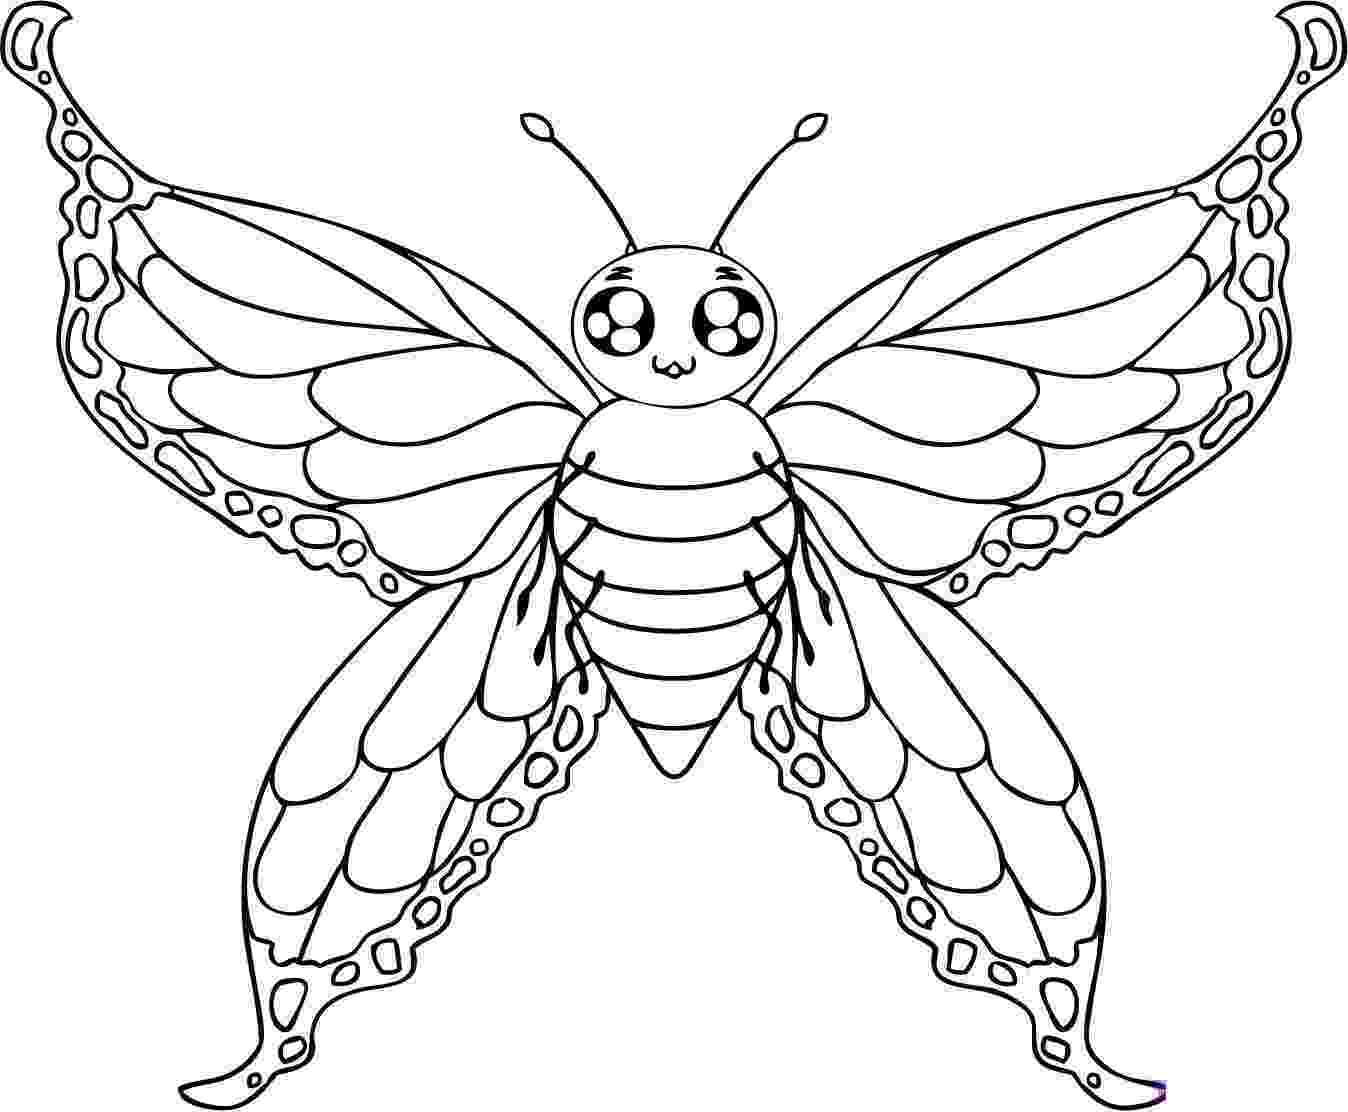 butterflies to color free printable butterfly coloring pages for kids cool2bkids butterflies to color free 